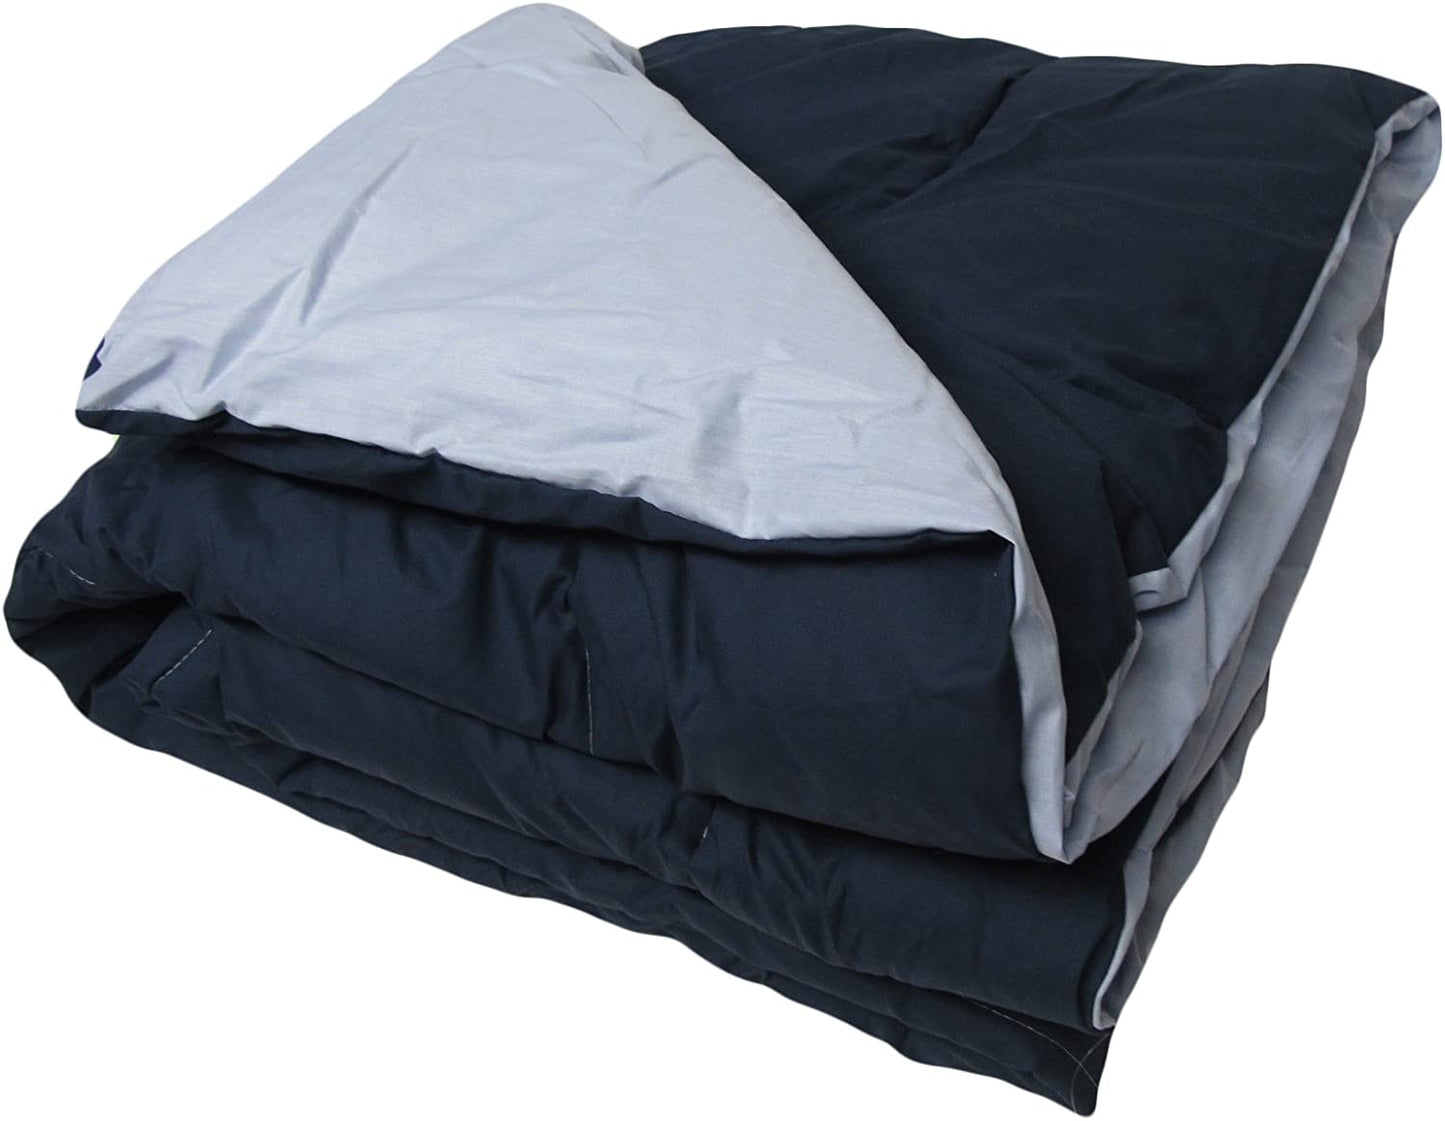 Percale Covered Comforter, Twin Size, Navy - Light Blue Reversible. Non-Allergenic, Great for Camp.